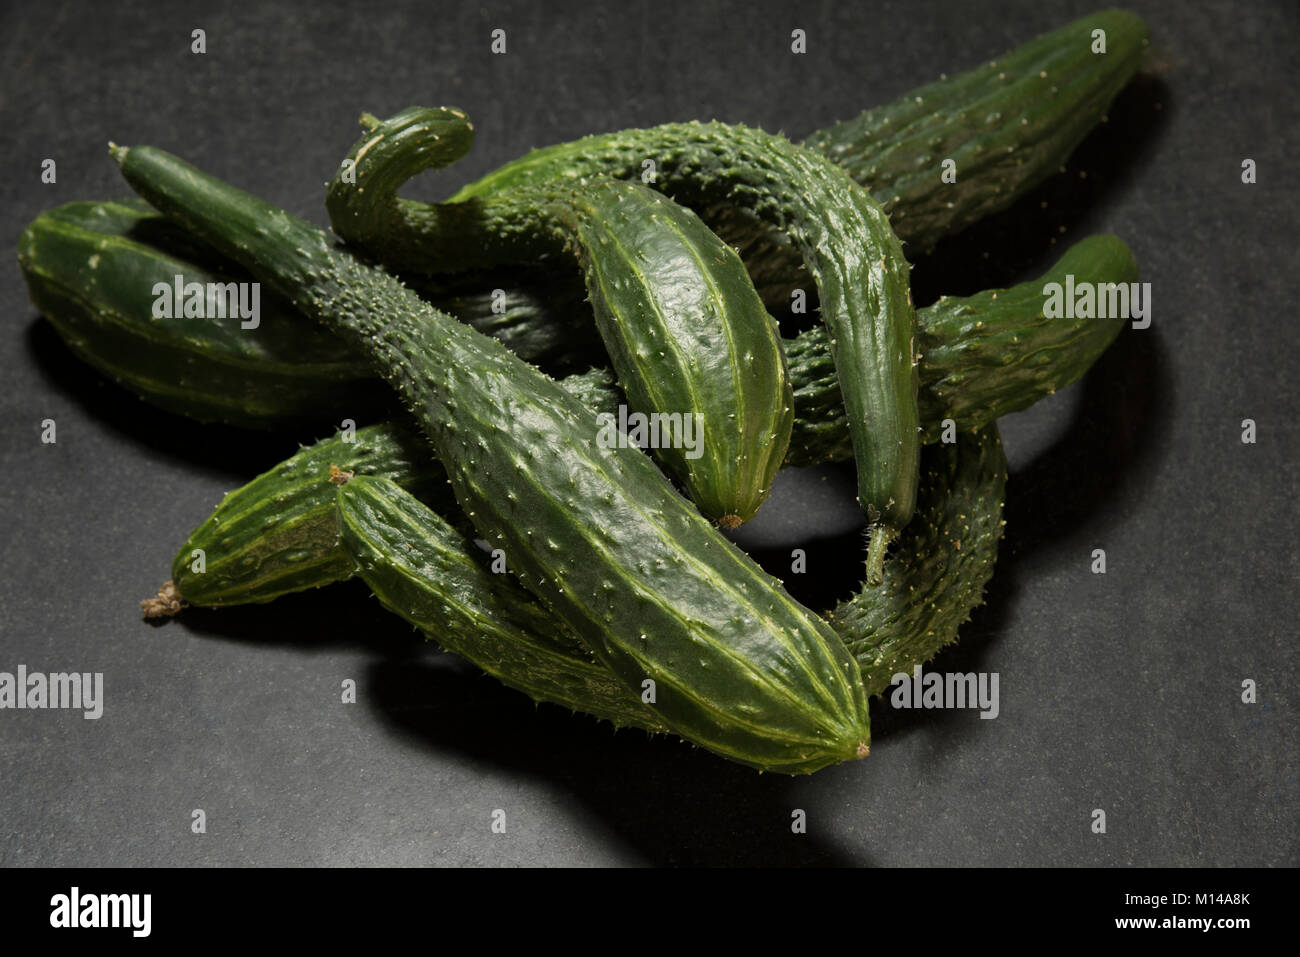 A group of fresh picked long Chinese suyo burpless, spiney cucumbers is ready to de-spine and cut. Stock Photo